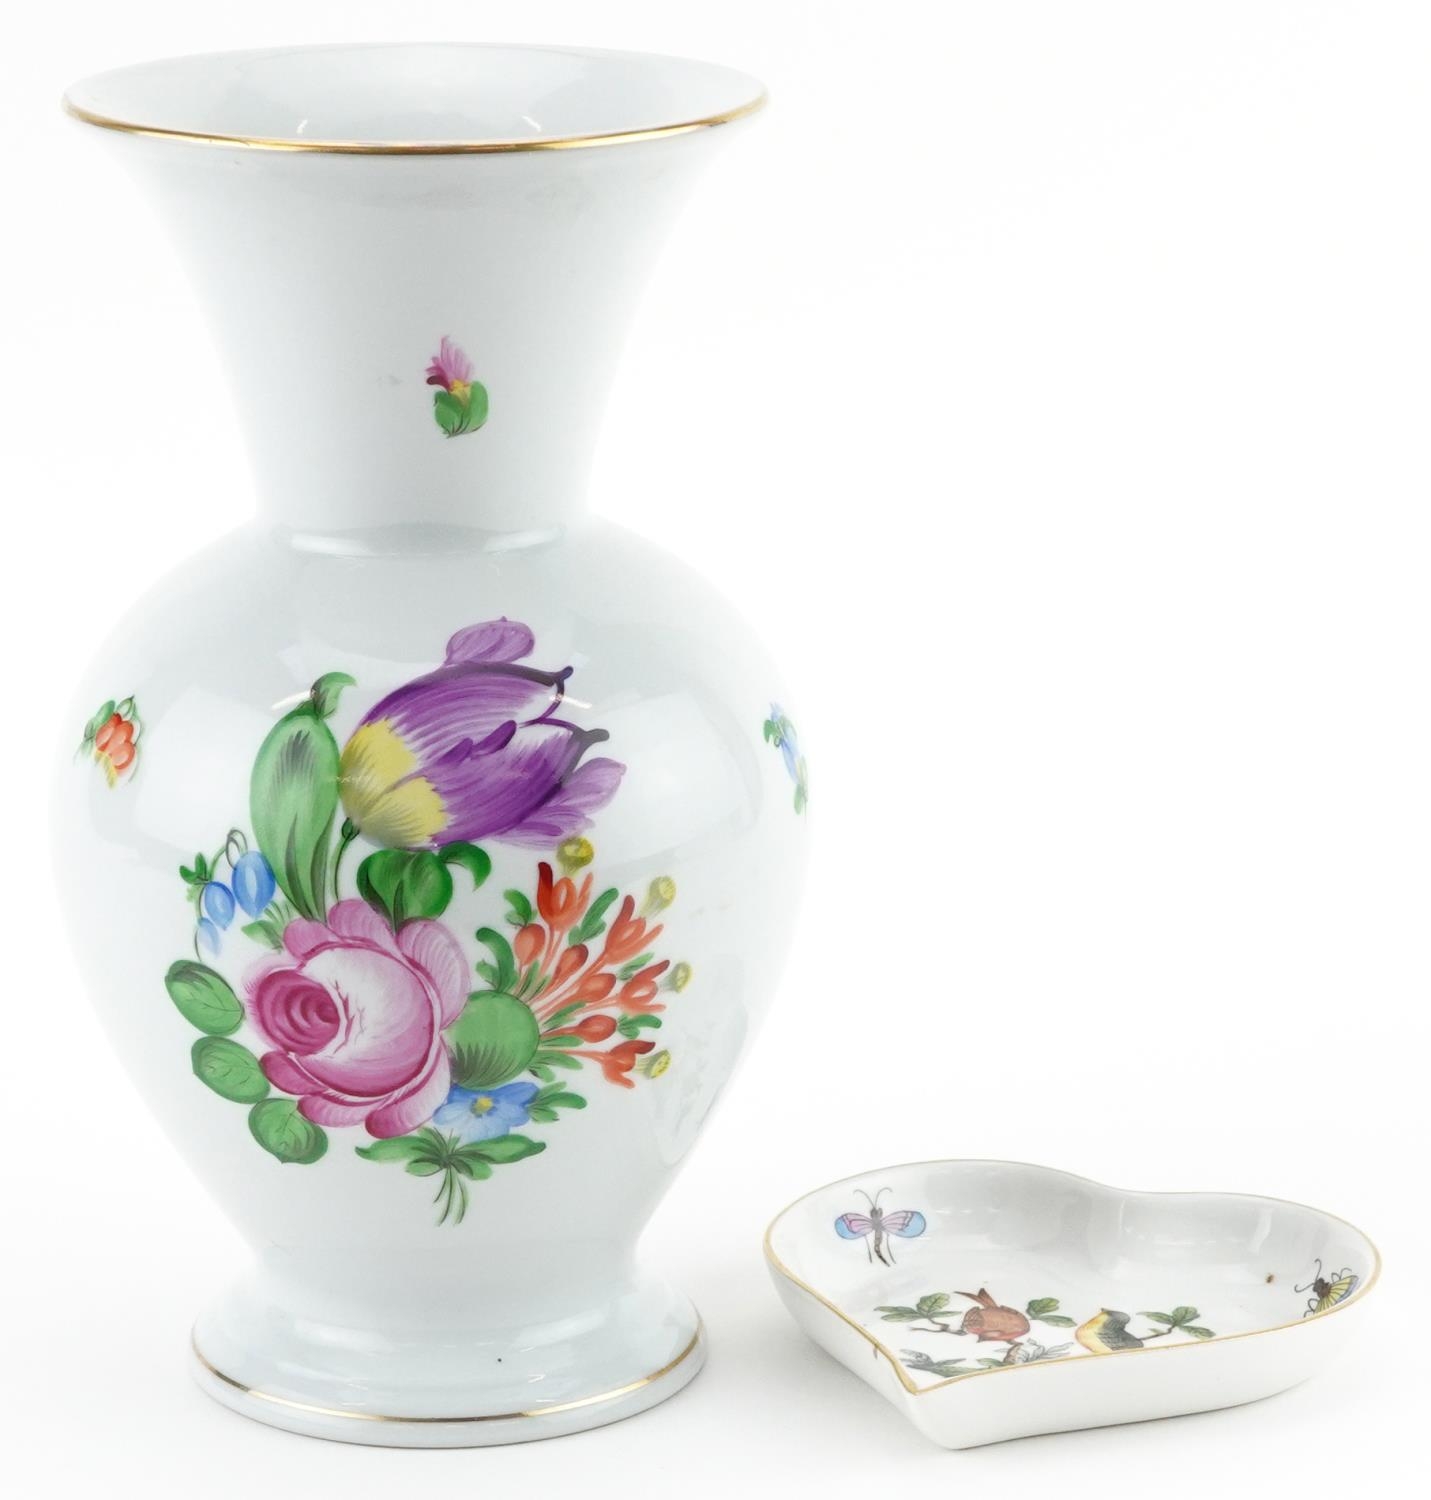 Herend, Hungarian porcelain vase hand painted with flowers and a heart shaped dish hand painted in - Image 2 of 5